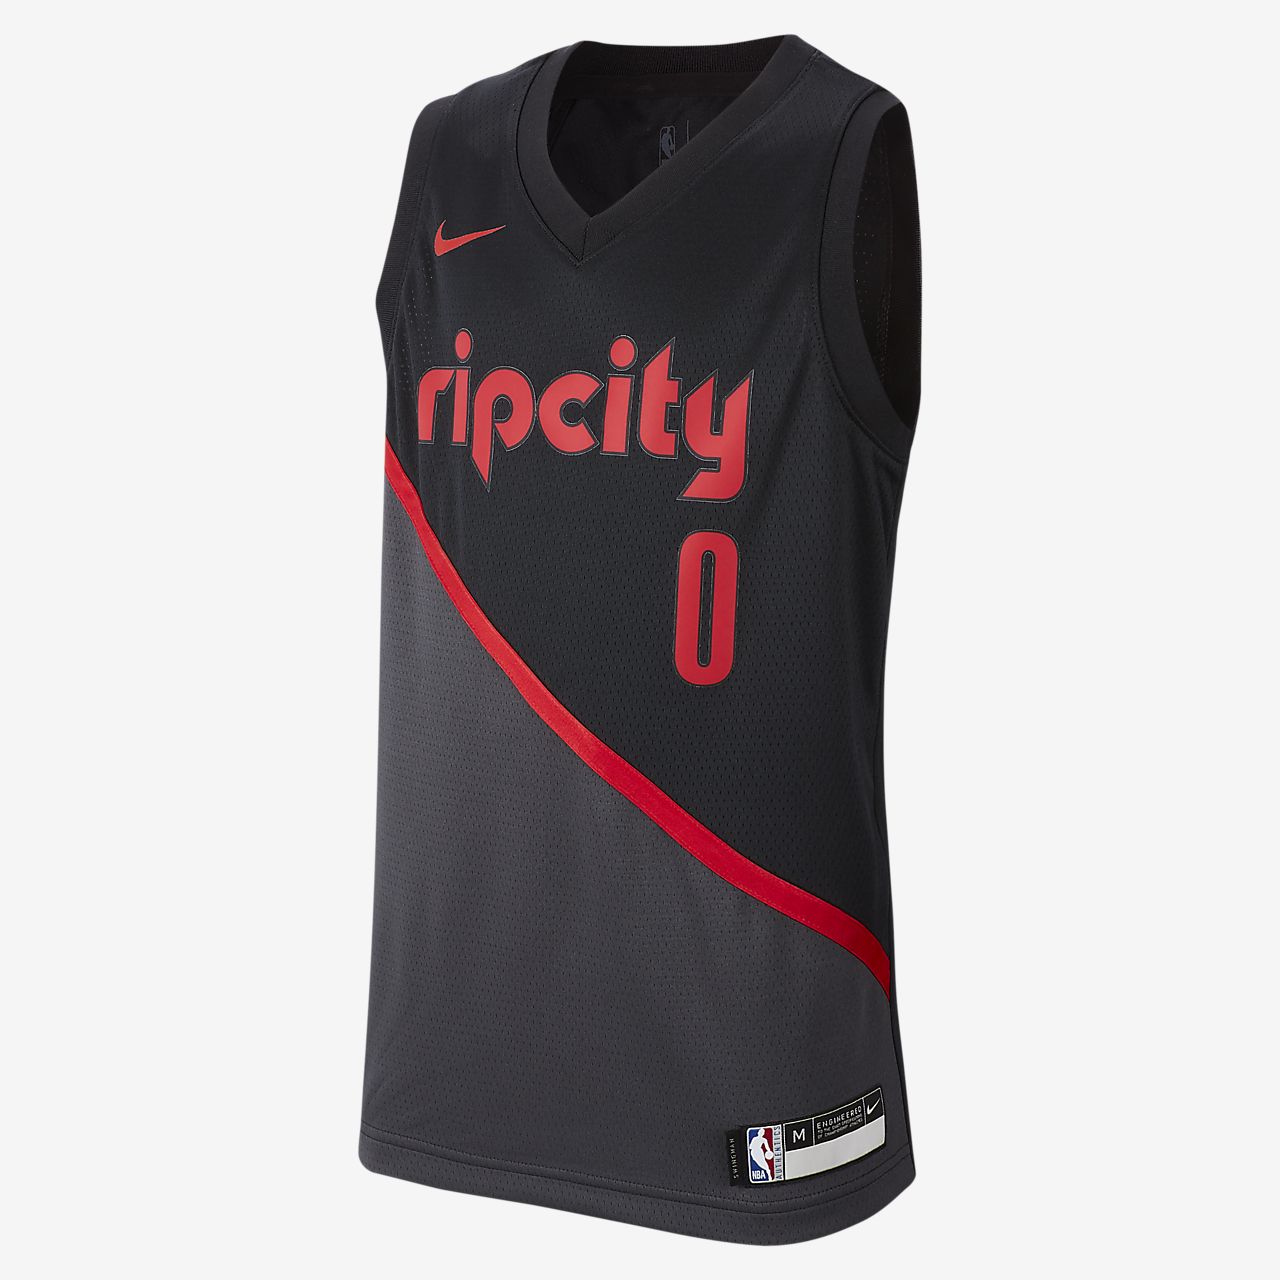 why does portland have rip city on their jerseys